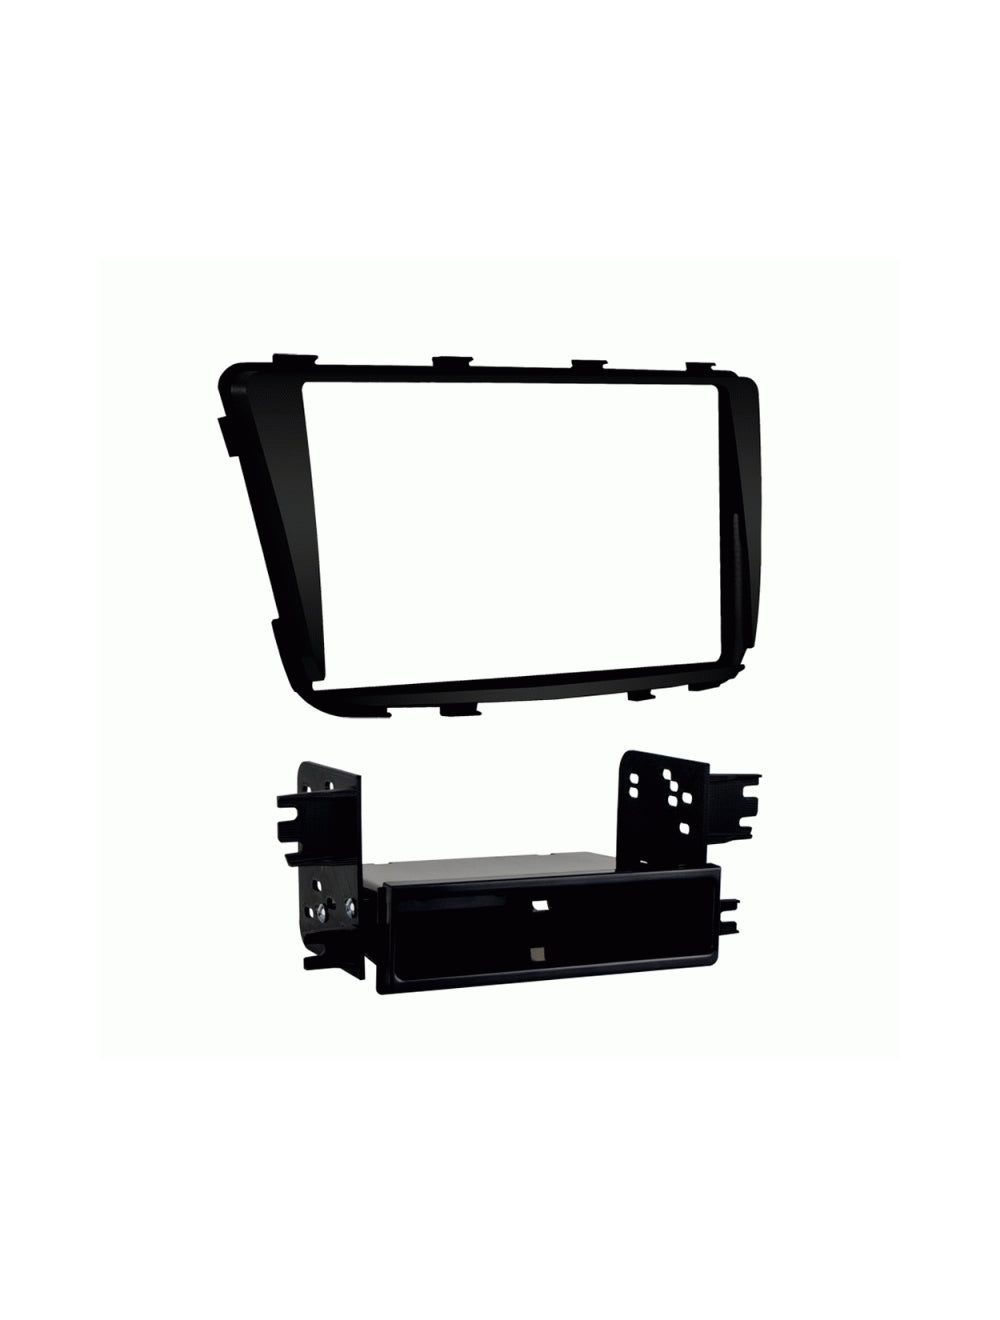 Metra 99-7347B Single/Double DIN Dash Installation Kit for 2012-Up Hyundai Accent